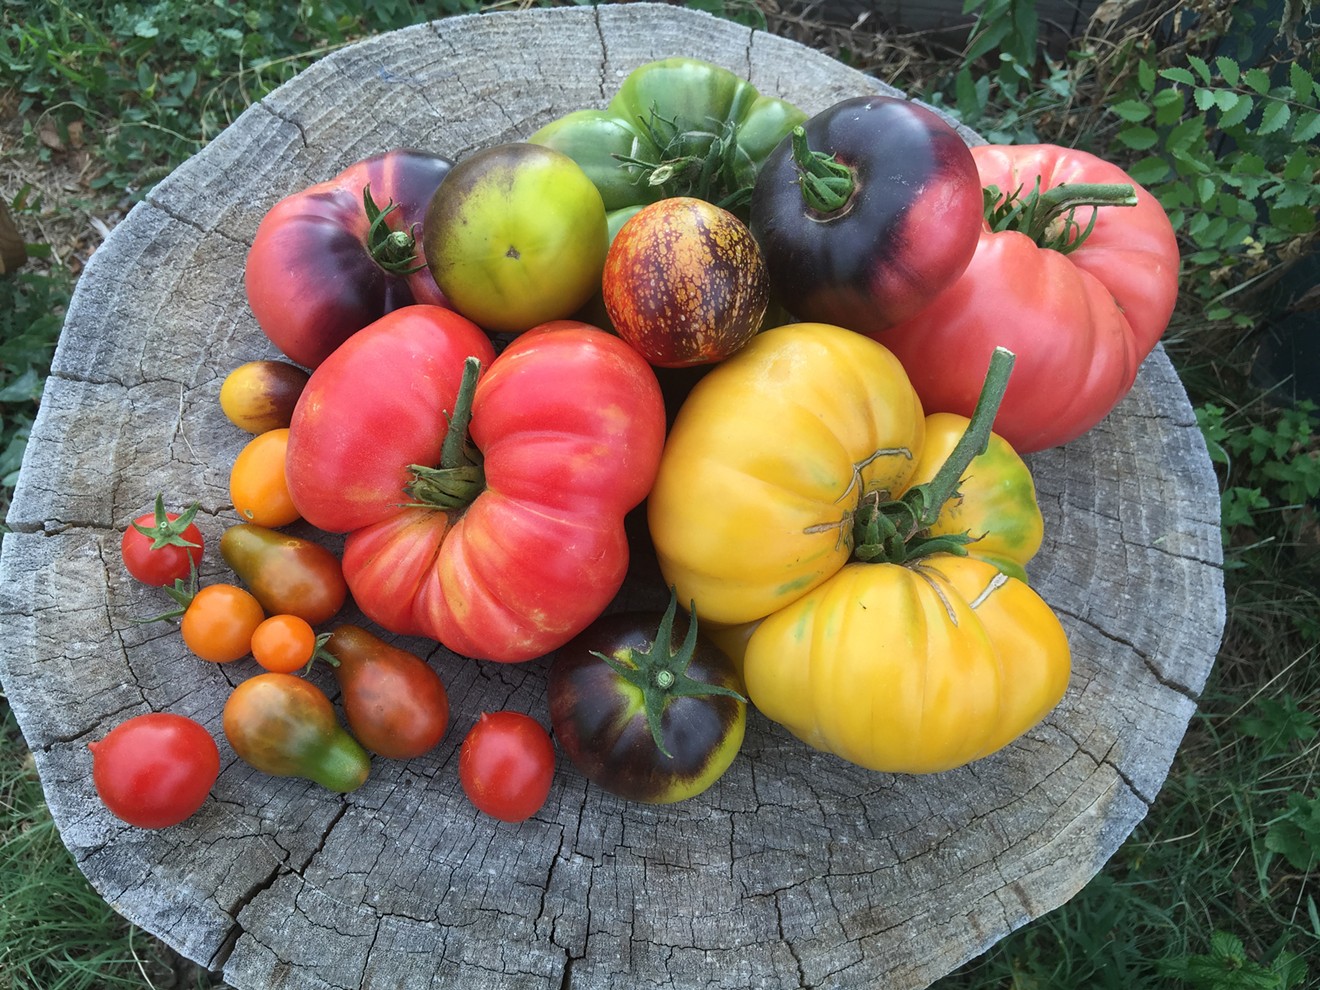 Be gone, flavorless winter tomatoes!